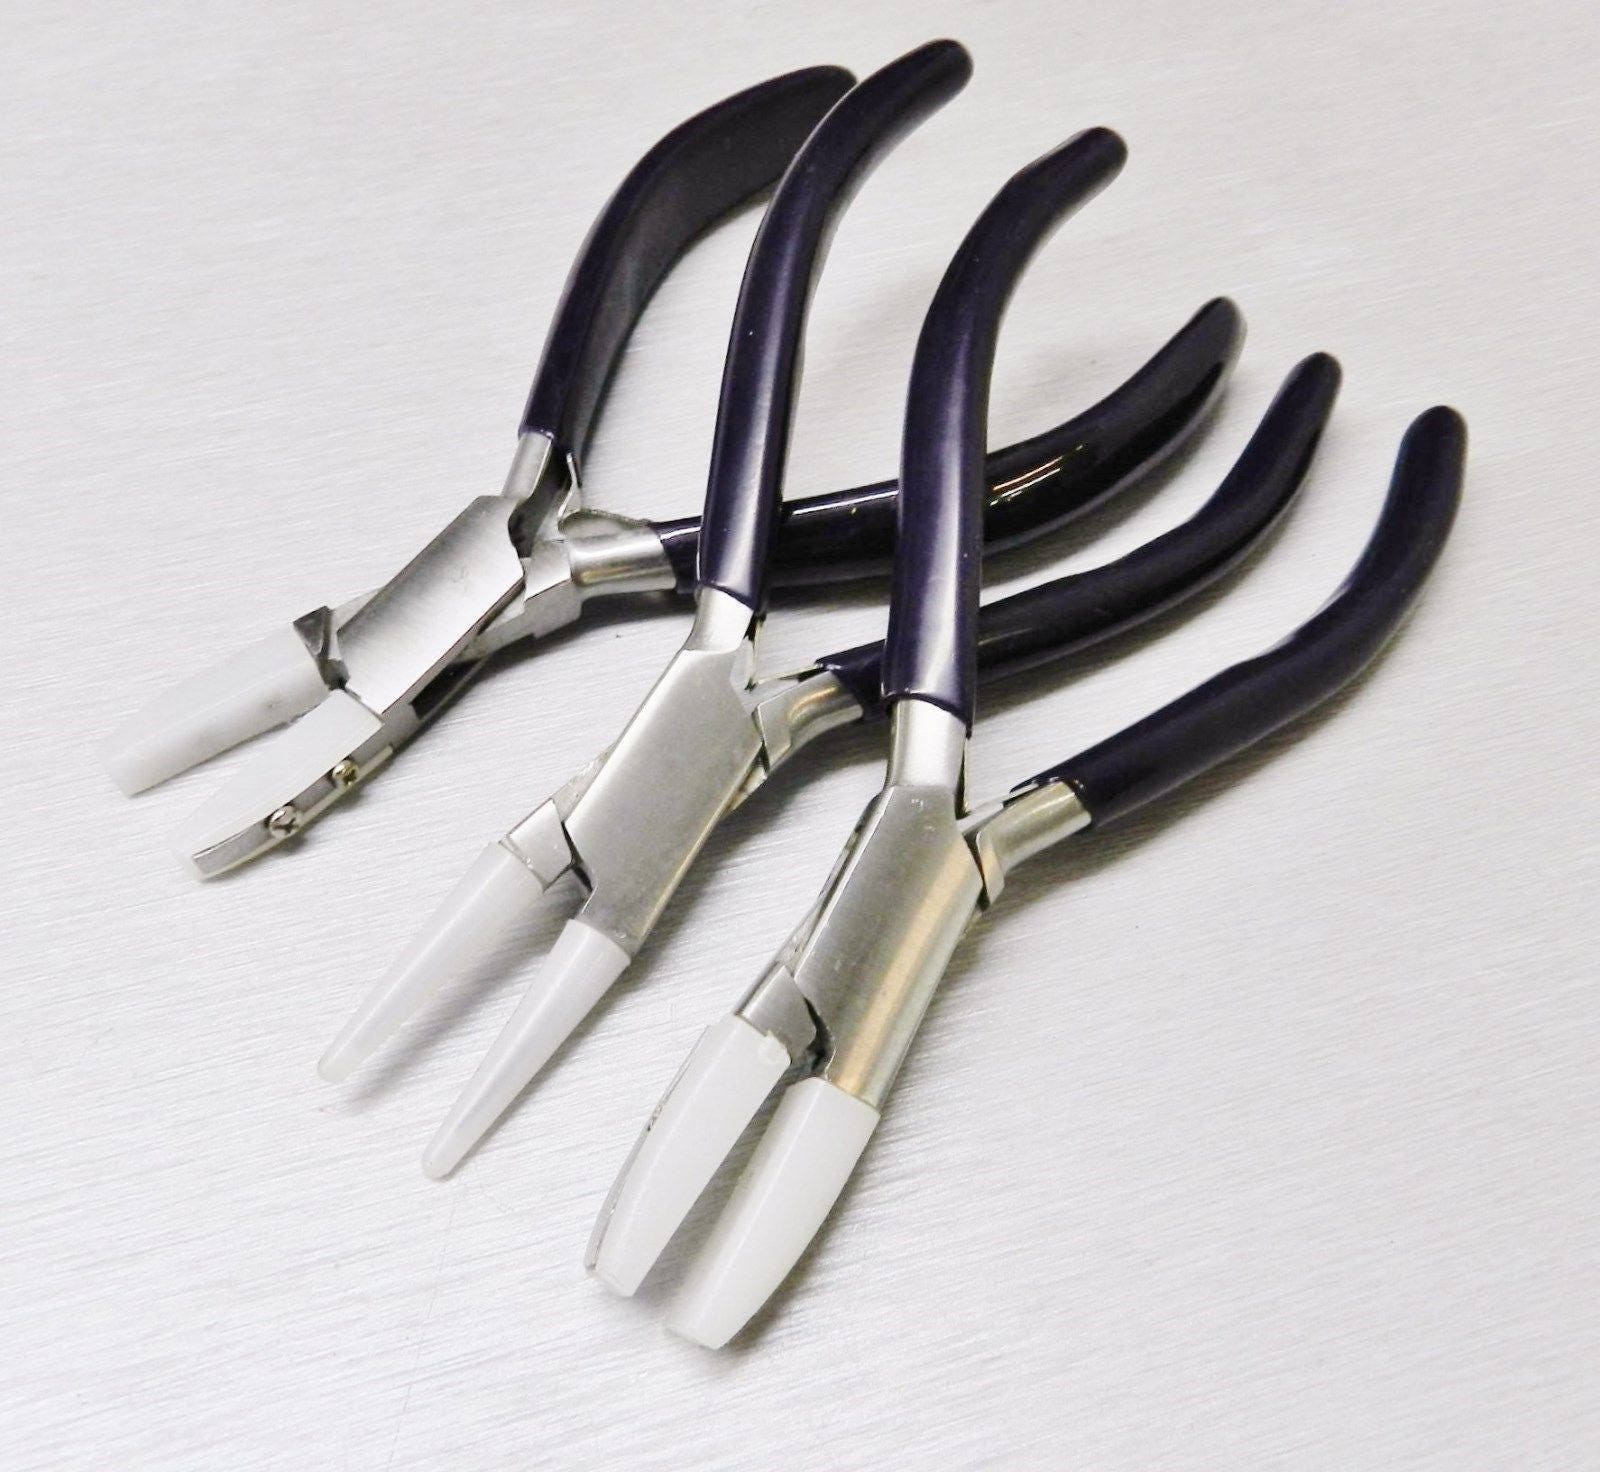 Nylon Jaw Pliers HD 3 Set Jewelry Craft Bead Wire Working Bending Forming  Tools 10E 